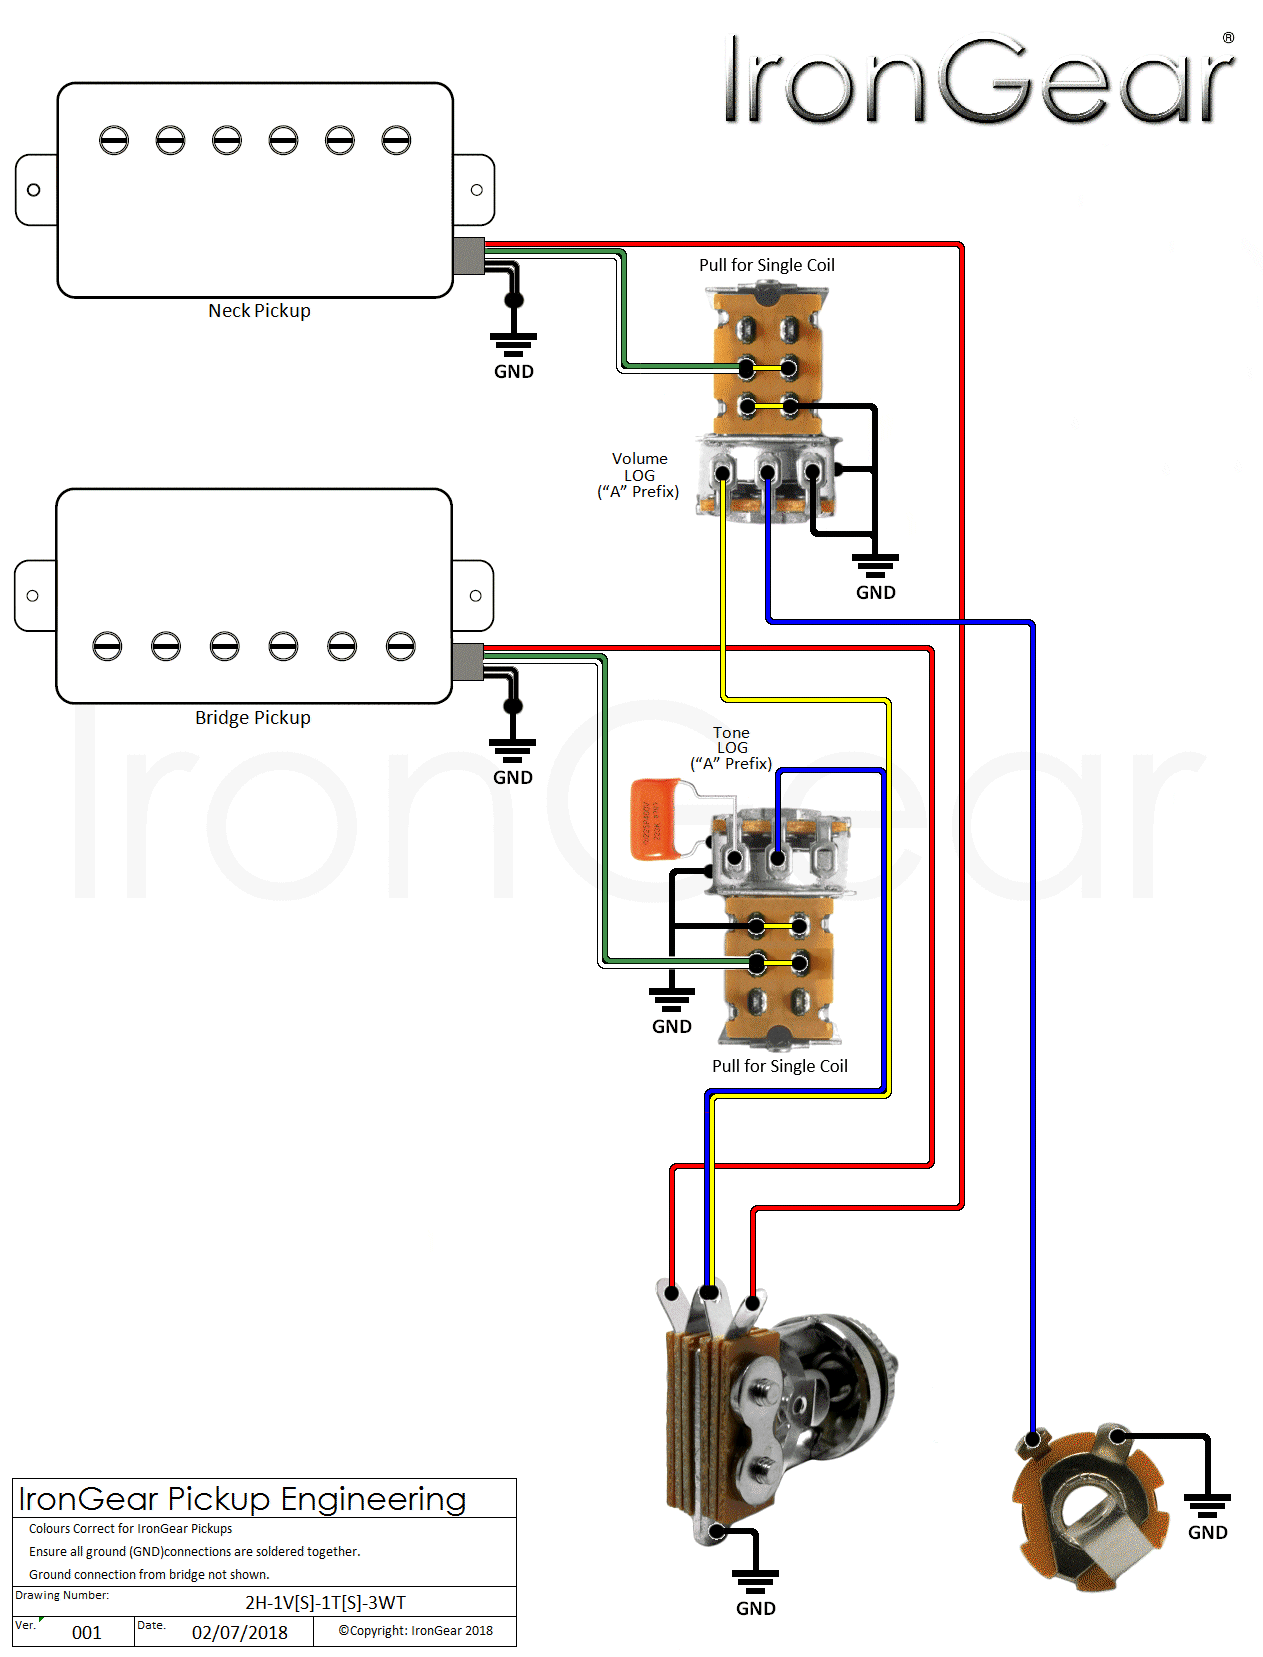 Wiring Diagram Telecaster One Humbucker One Single Coil from www.irongear.co.uk